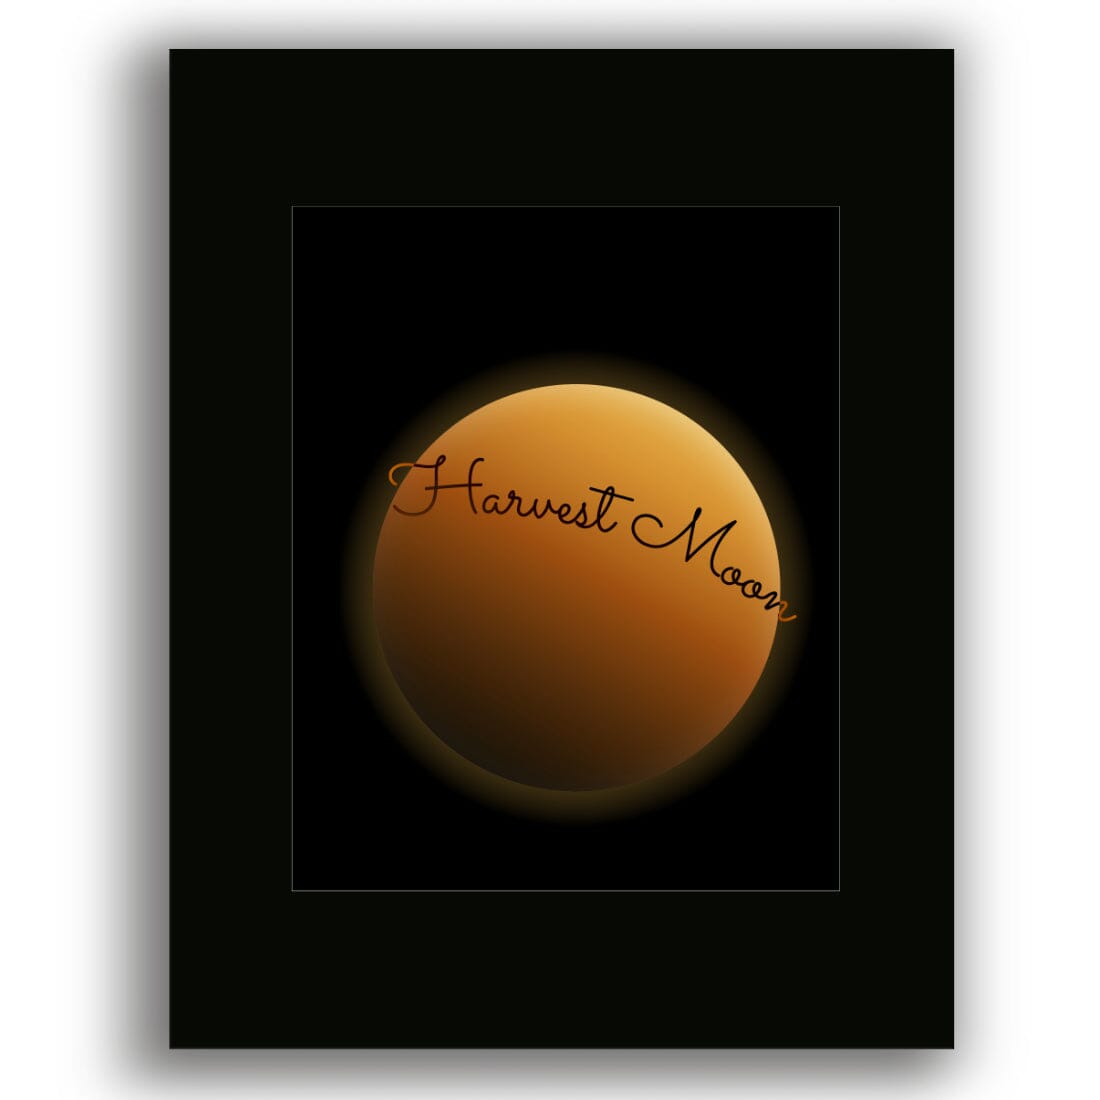 Harvest Moon by Neil Young - Music Song Lyric Print Artwork Song Lyrics Art Song Lyrics Art 8x10 Black Matted Print 